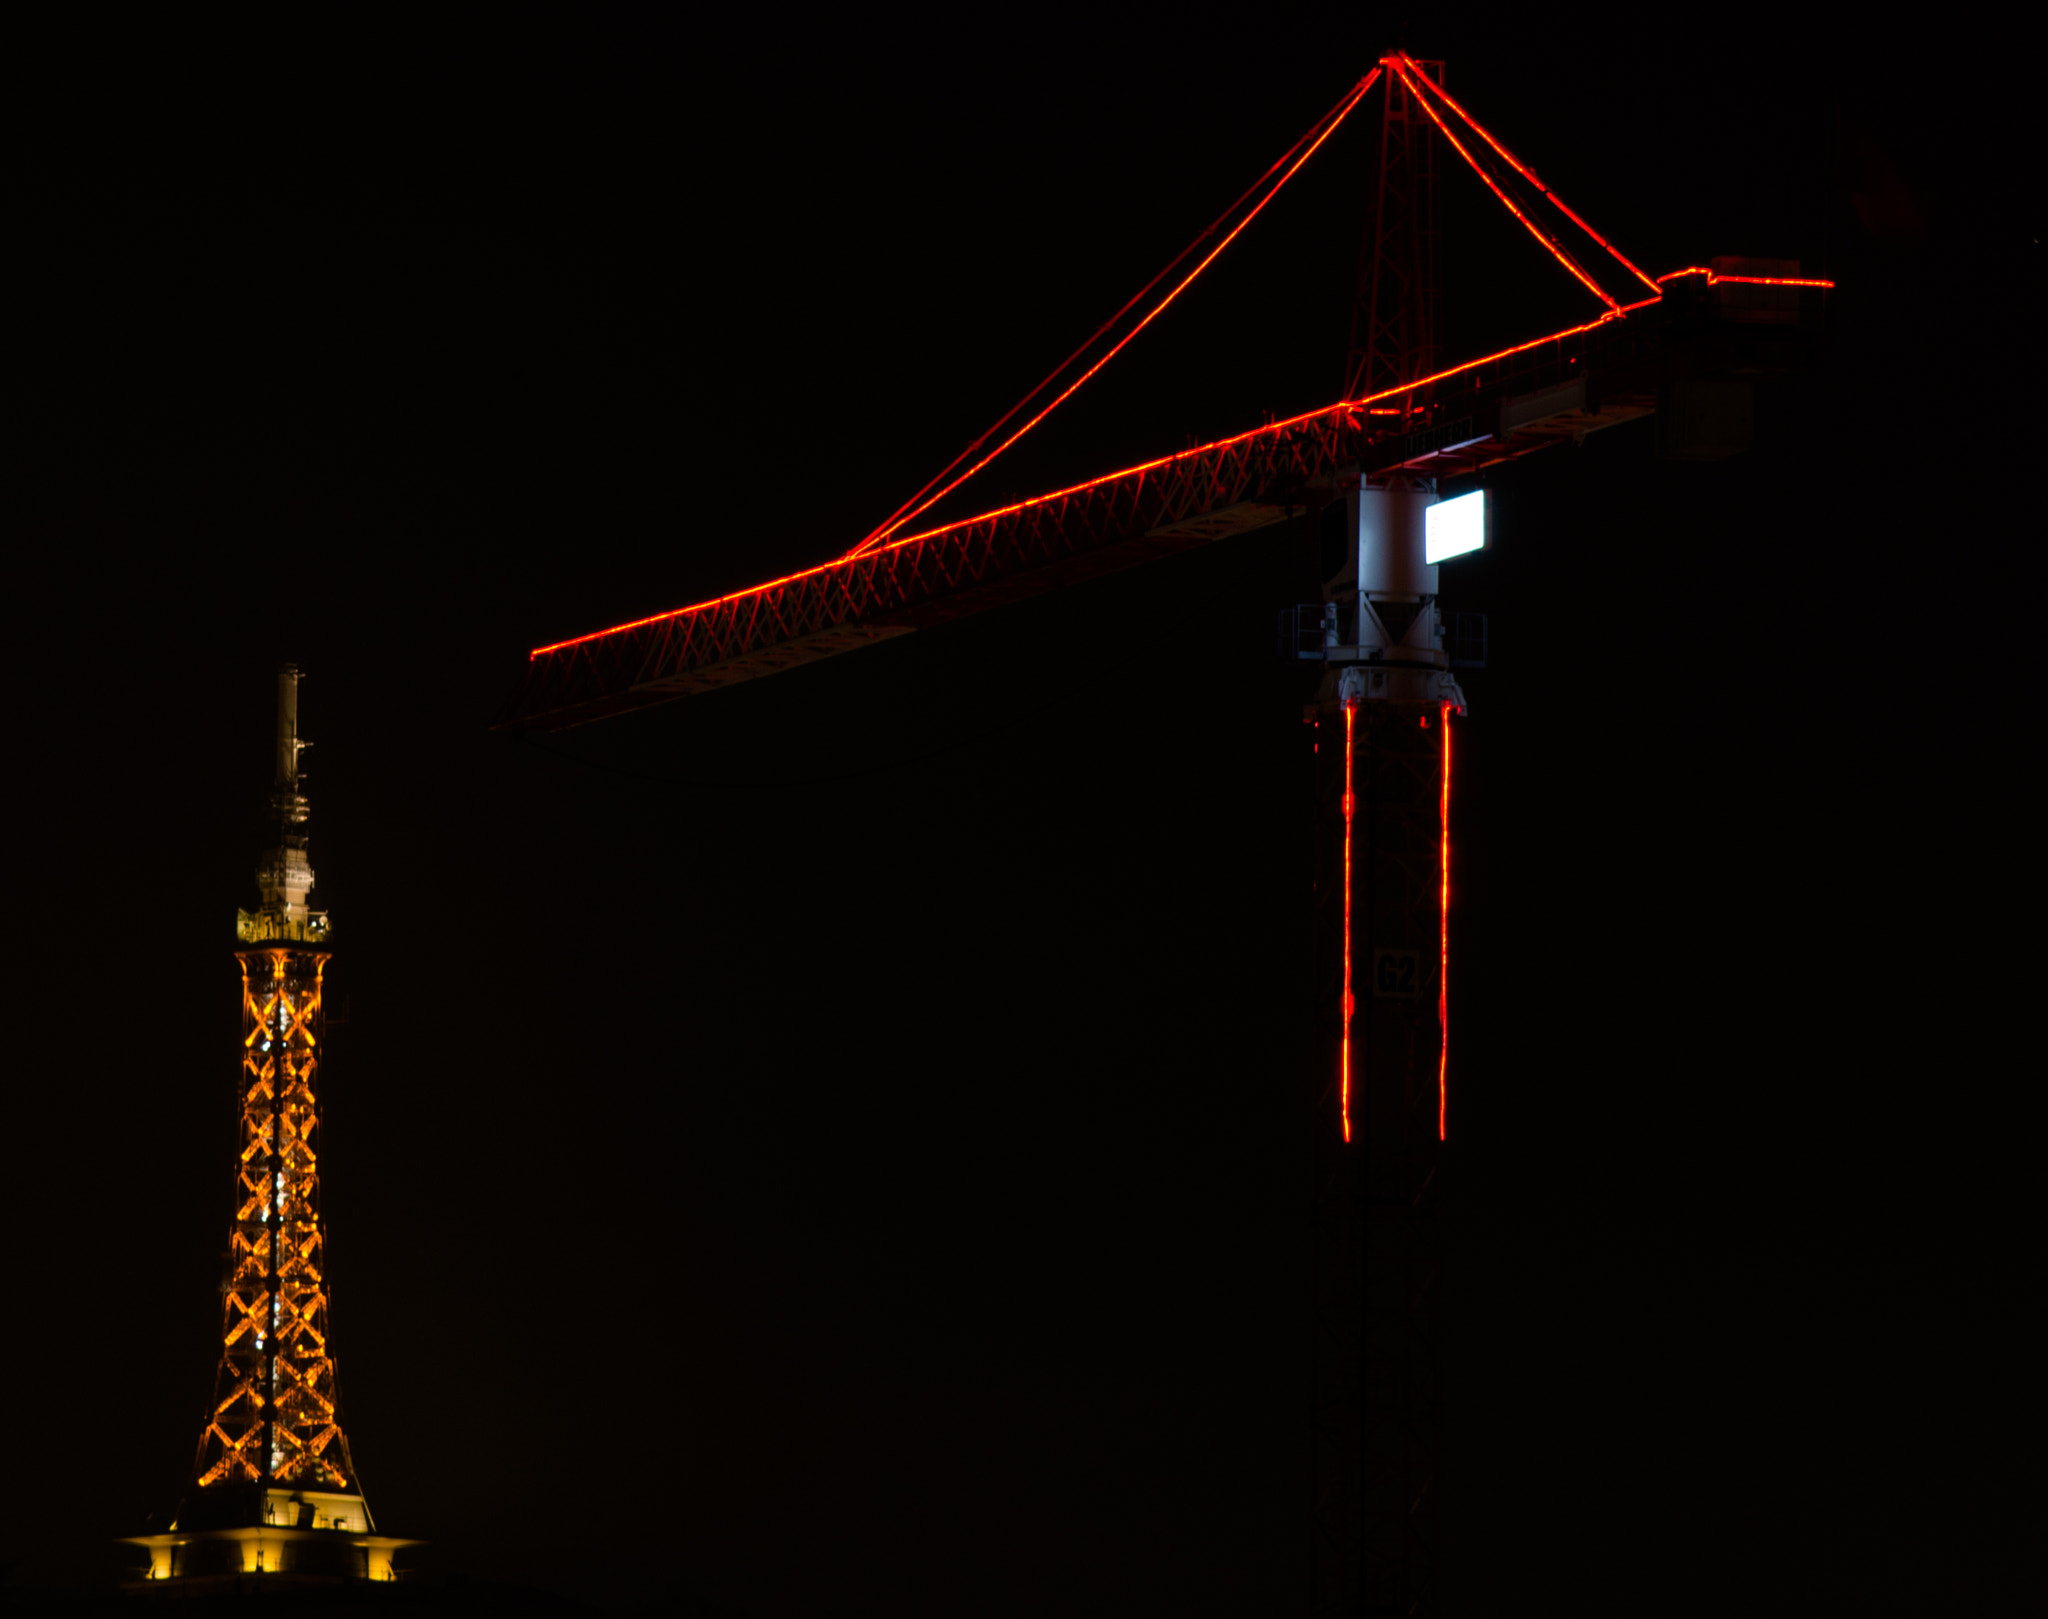 Pentax K-30 sample photo. Crane and metallic tower of fourviere at night photography